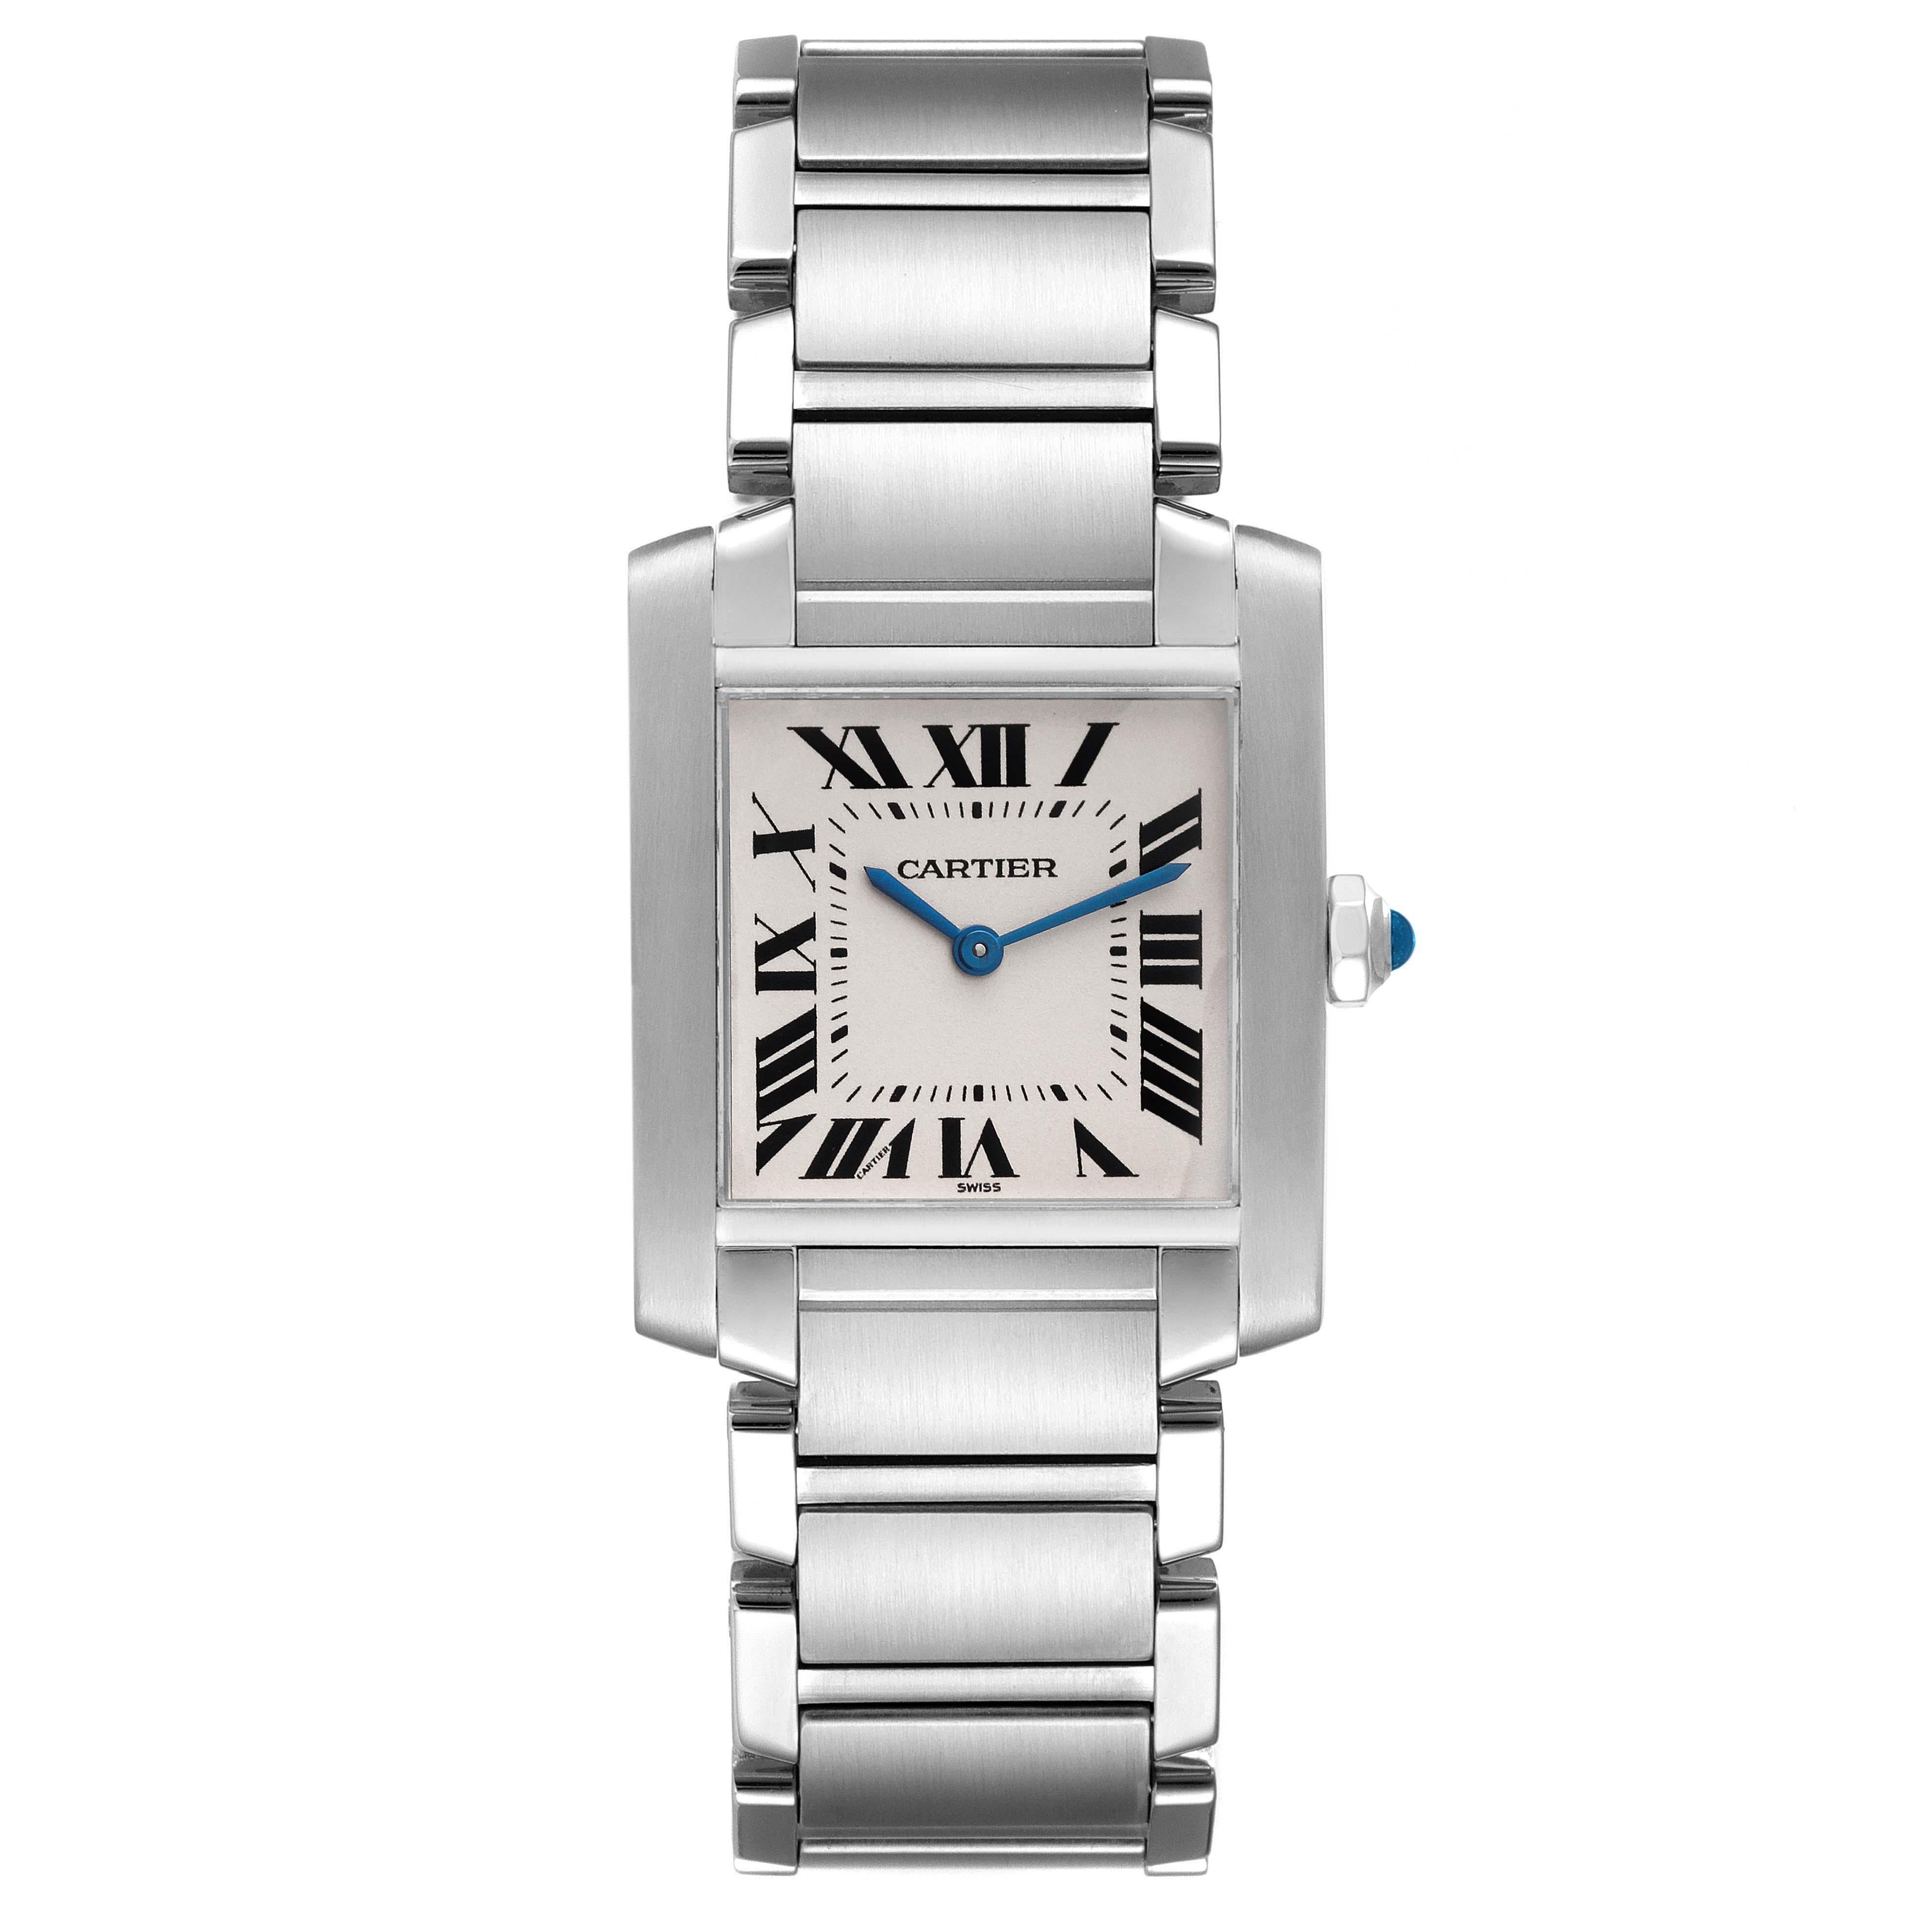 Cartier Tank Francaise Midsize Steel Ladies Watch WSTA0005. Quartz movement. Rectangular stainless steel 25.0 X 30.0 mm case. Octagonal crown set with a blue spinel cabochon. . Scratch resistant sapphire crystal. Silver grained dial with black